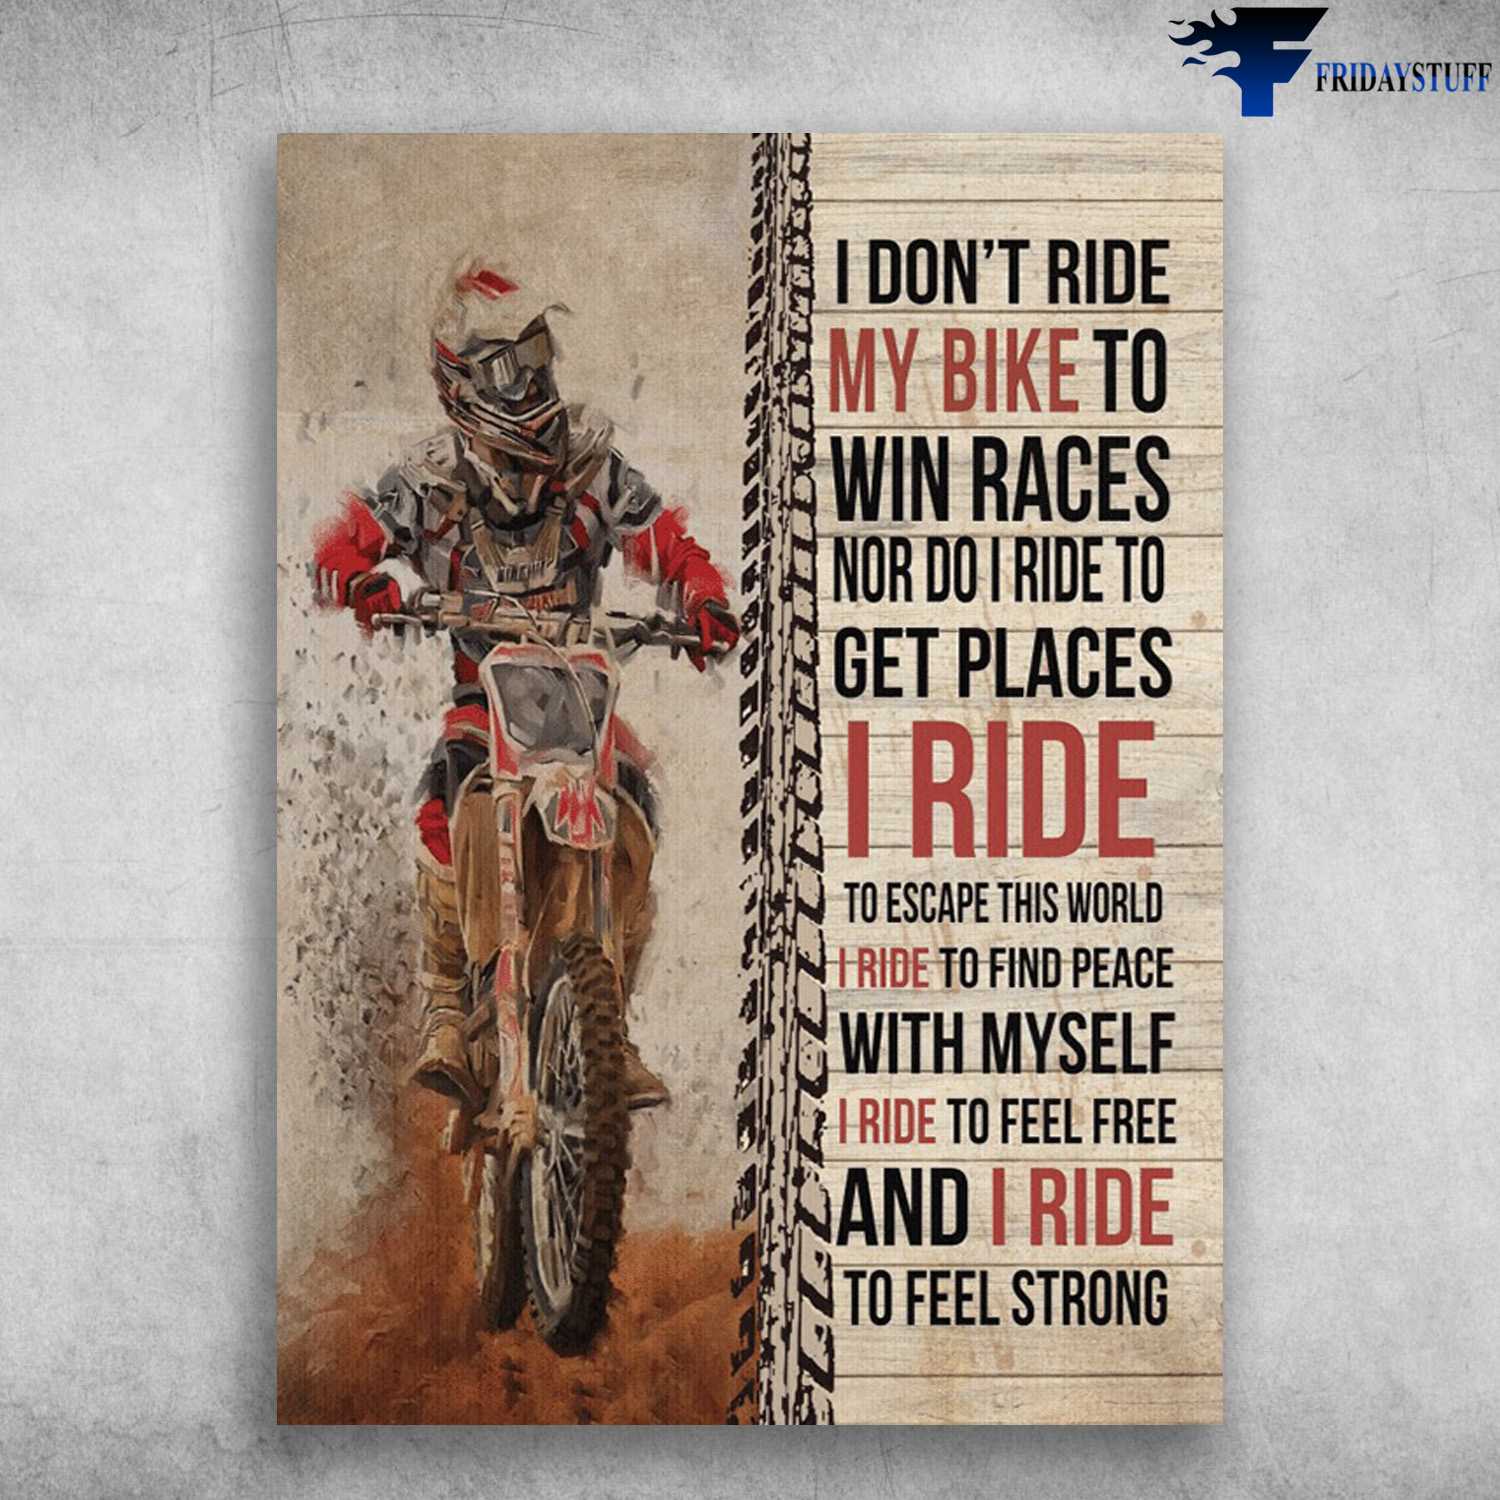 Motocross Poster, Dirtbike Lover - I Don't Ride My Bike To Win Races, Nor Do I Ride To Get Places, I Ride To Escape This World, I Ride To Find Peace With Myself